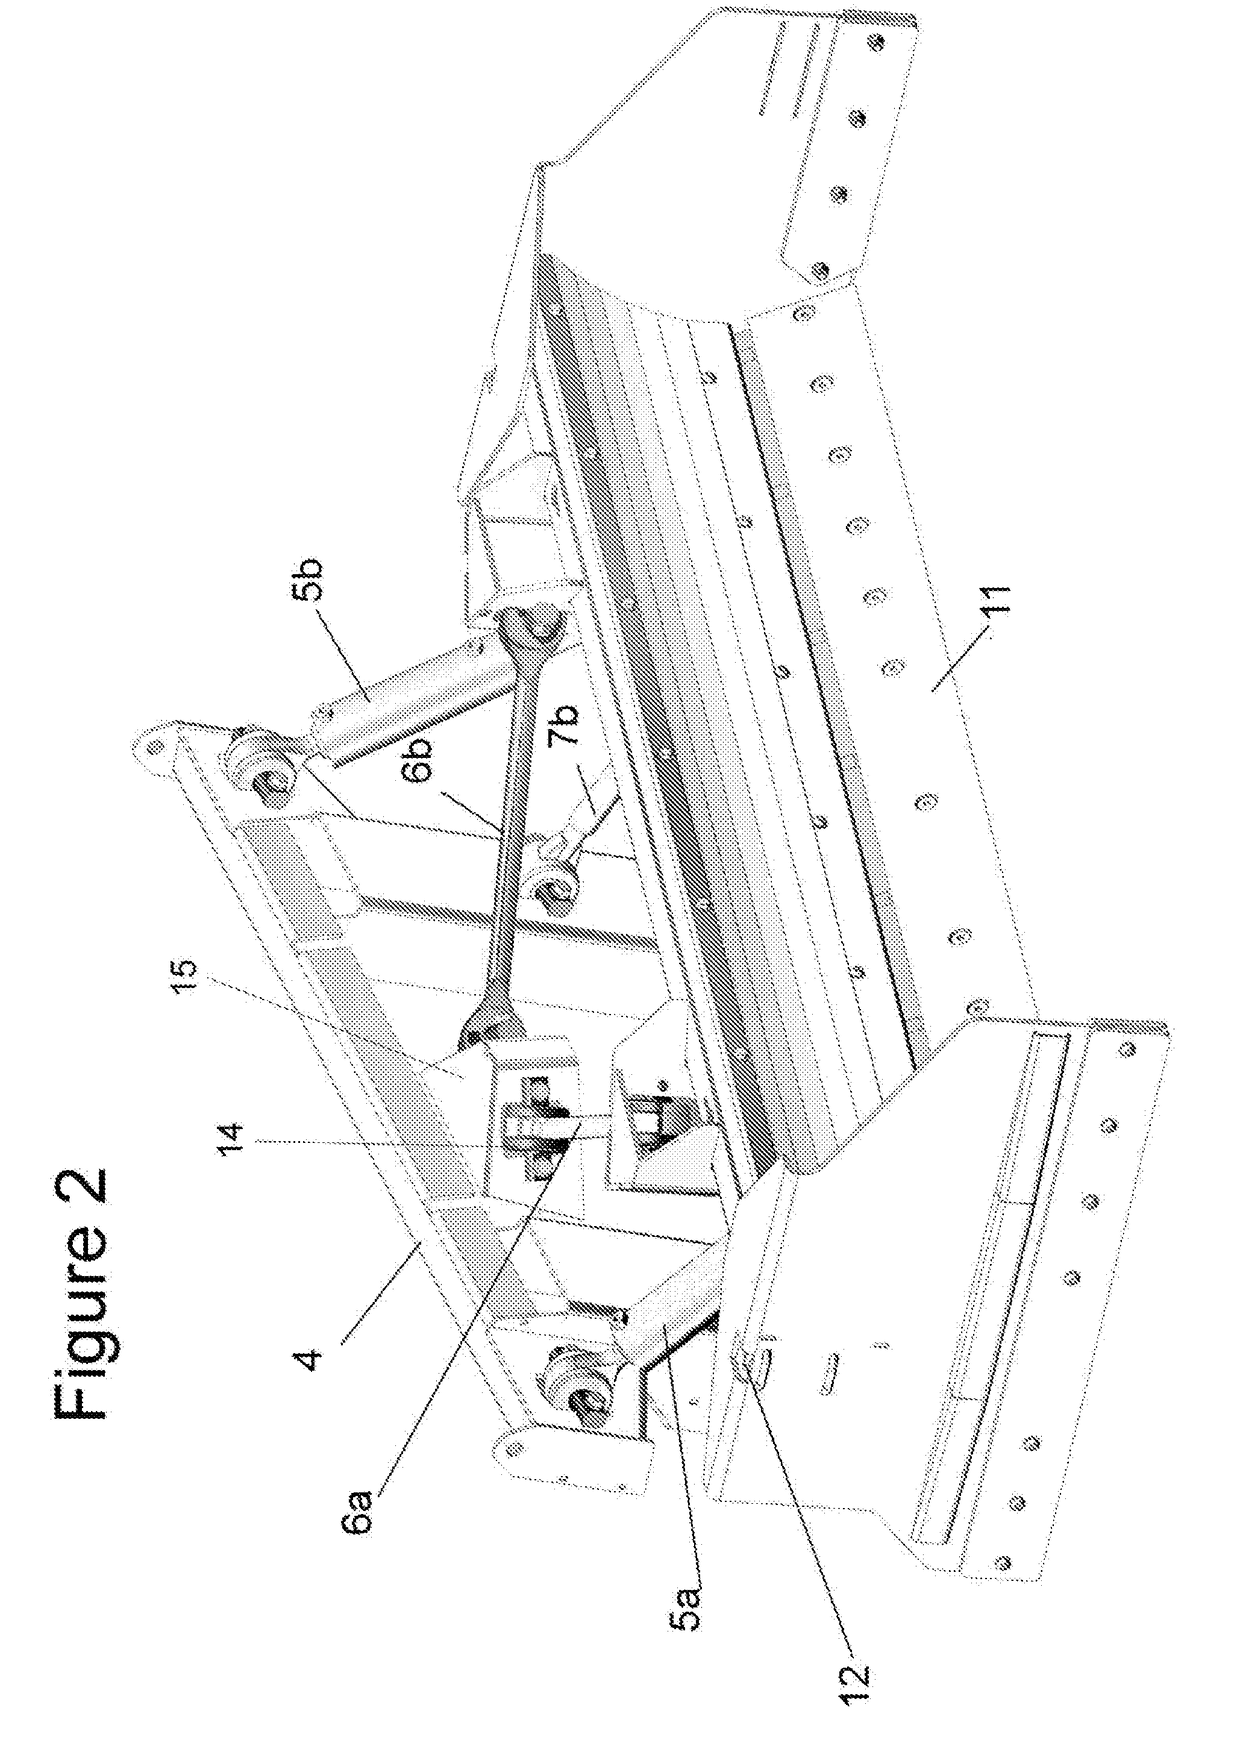 Blade levelling apparatus and mounting system